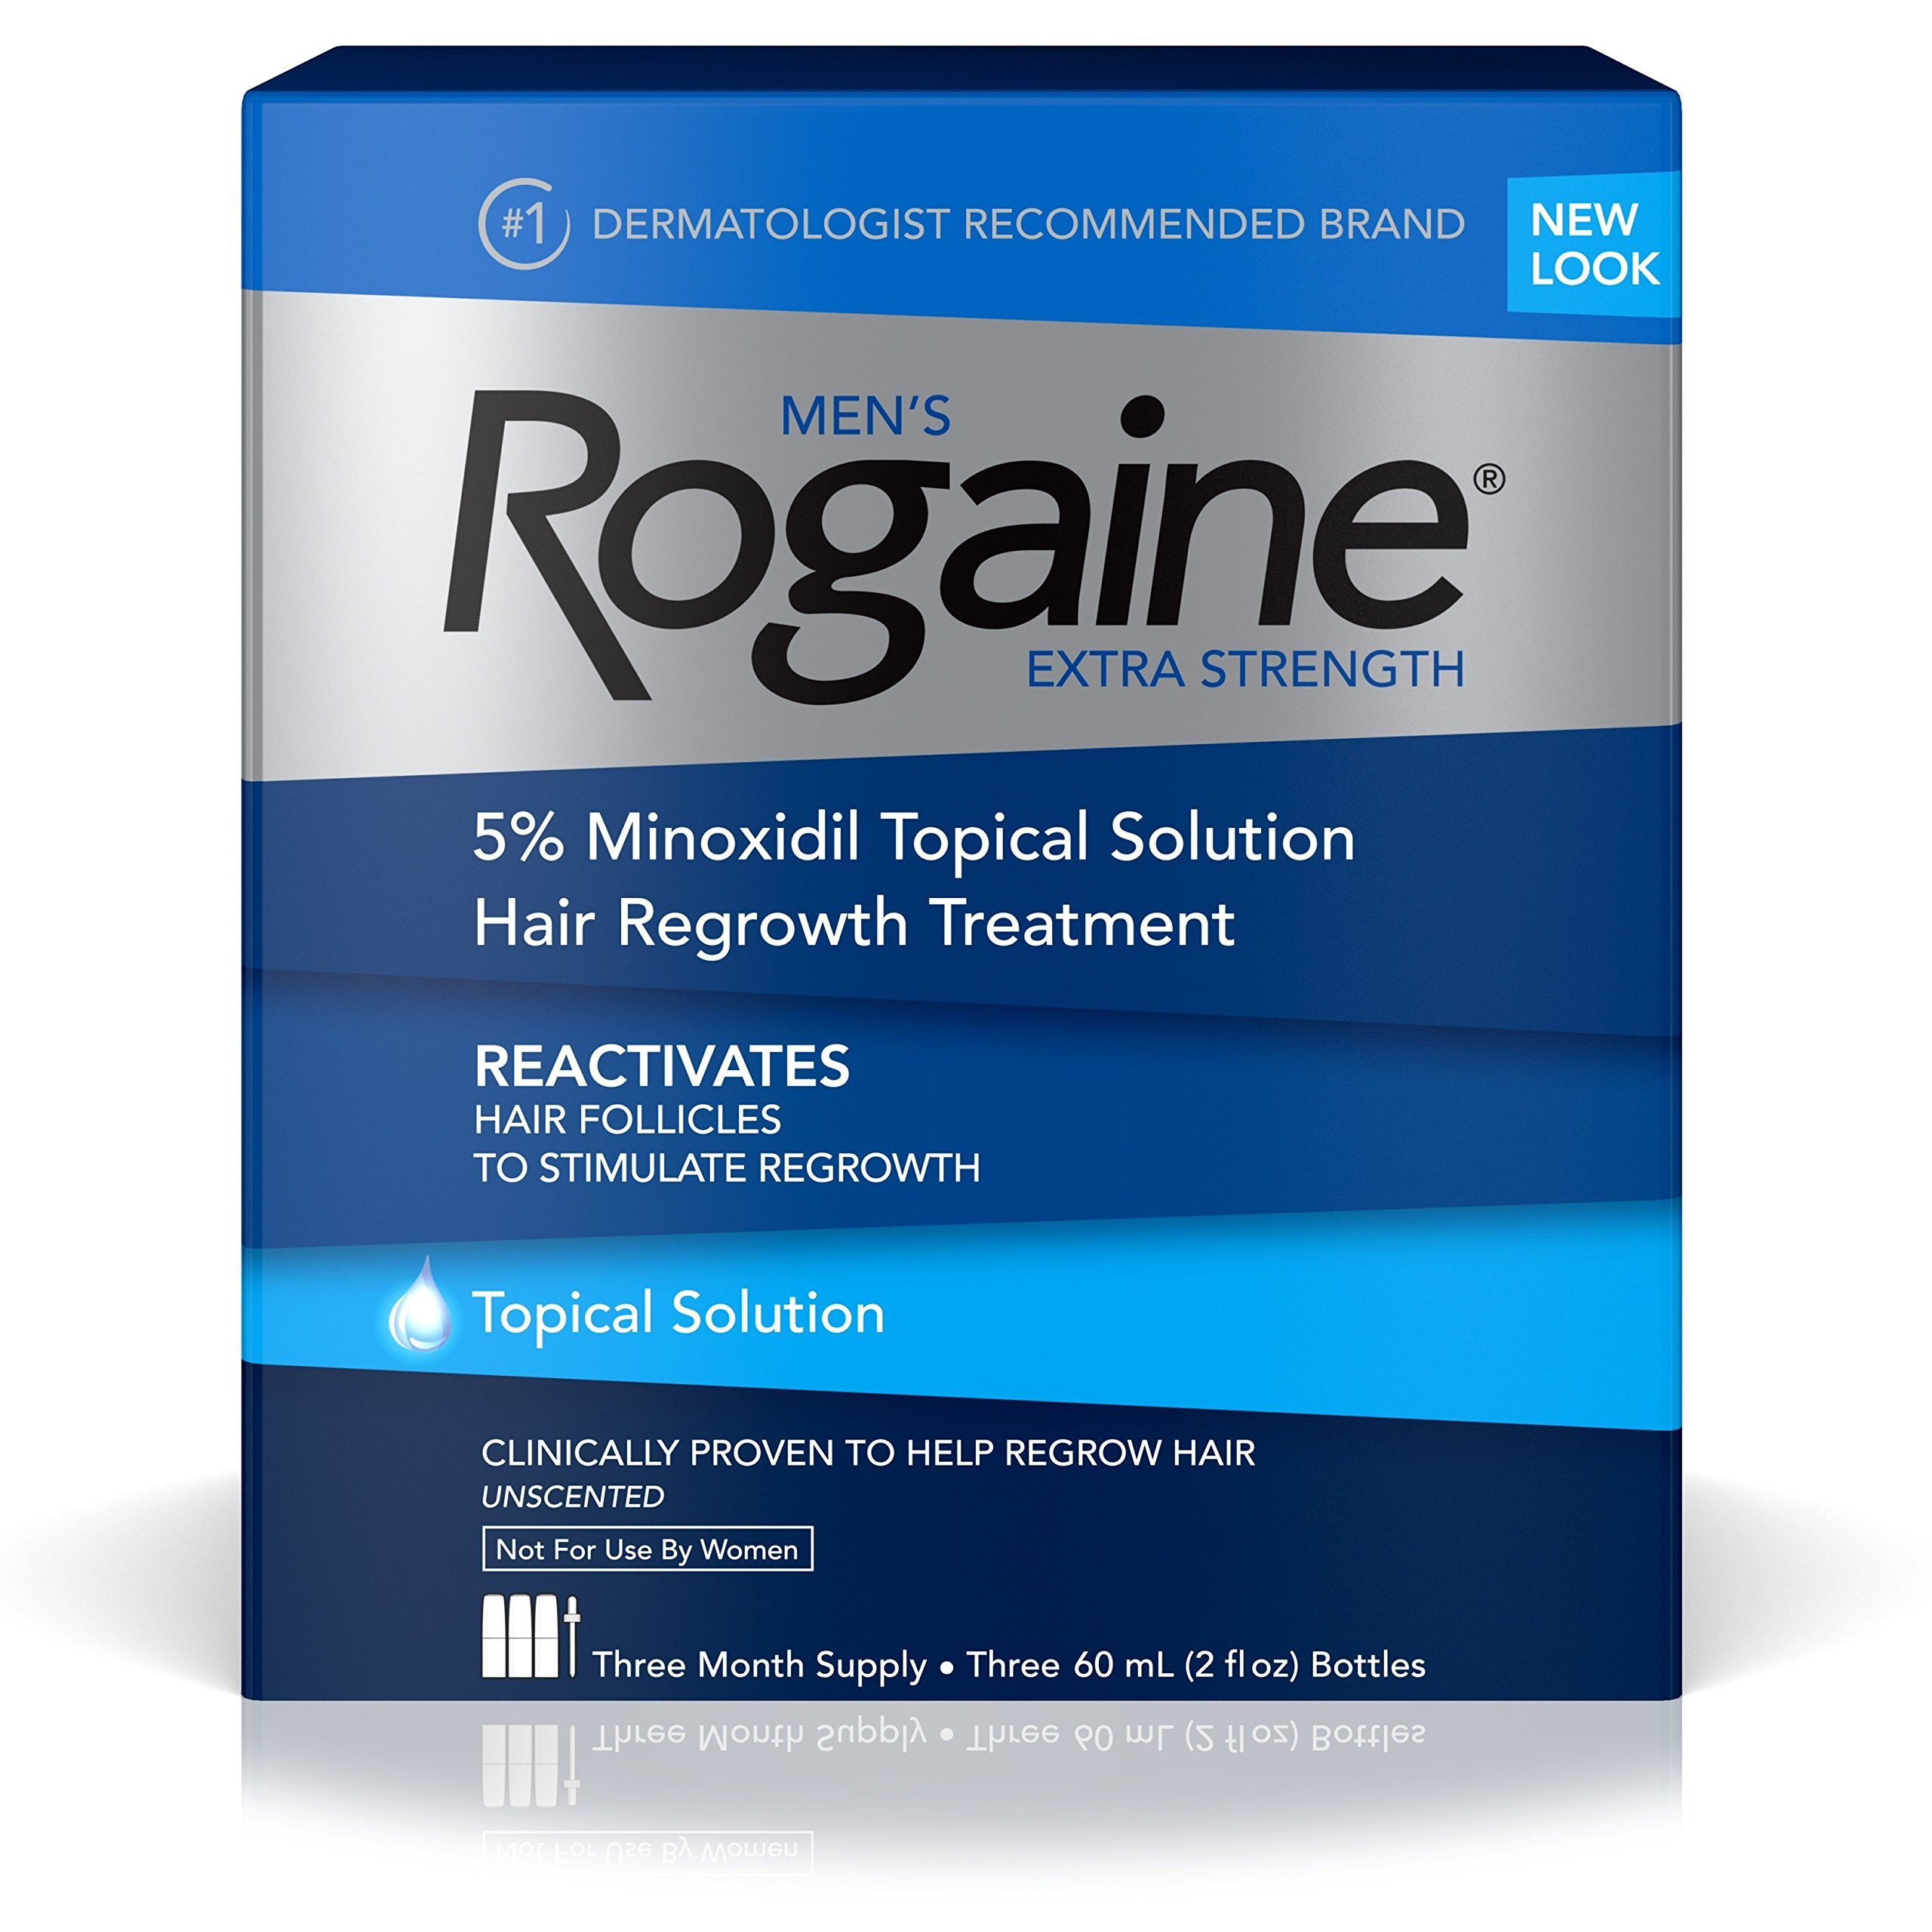 Men's Rogaine 5% Minoxidil Foam, 2.11 Ounce (Pack of 3) & Rogaine Extra Strength 5% Minoxidil Topical Solution for Hair Loss and Hair Regrowth, Topical Treatment for Thinning Hair, 3-Month Supply